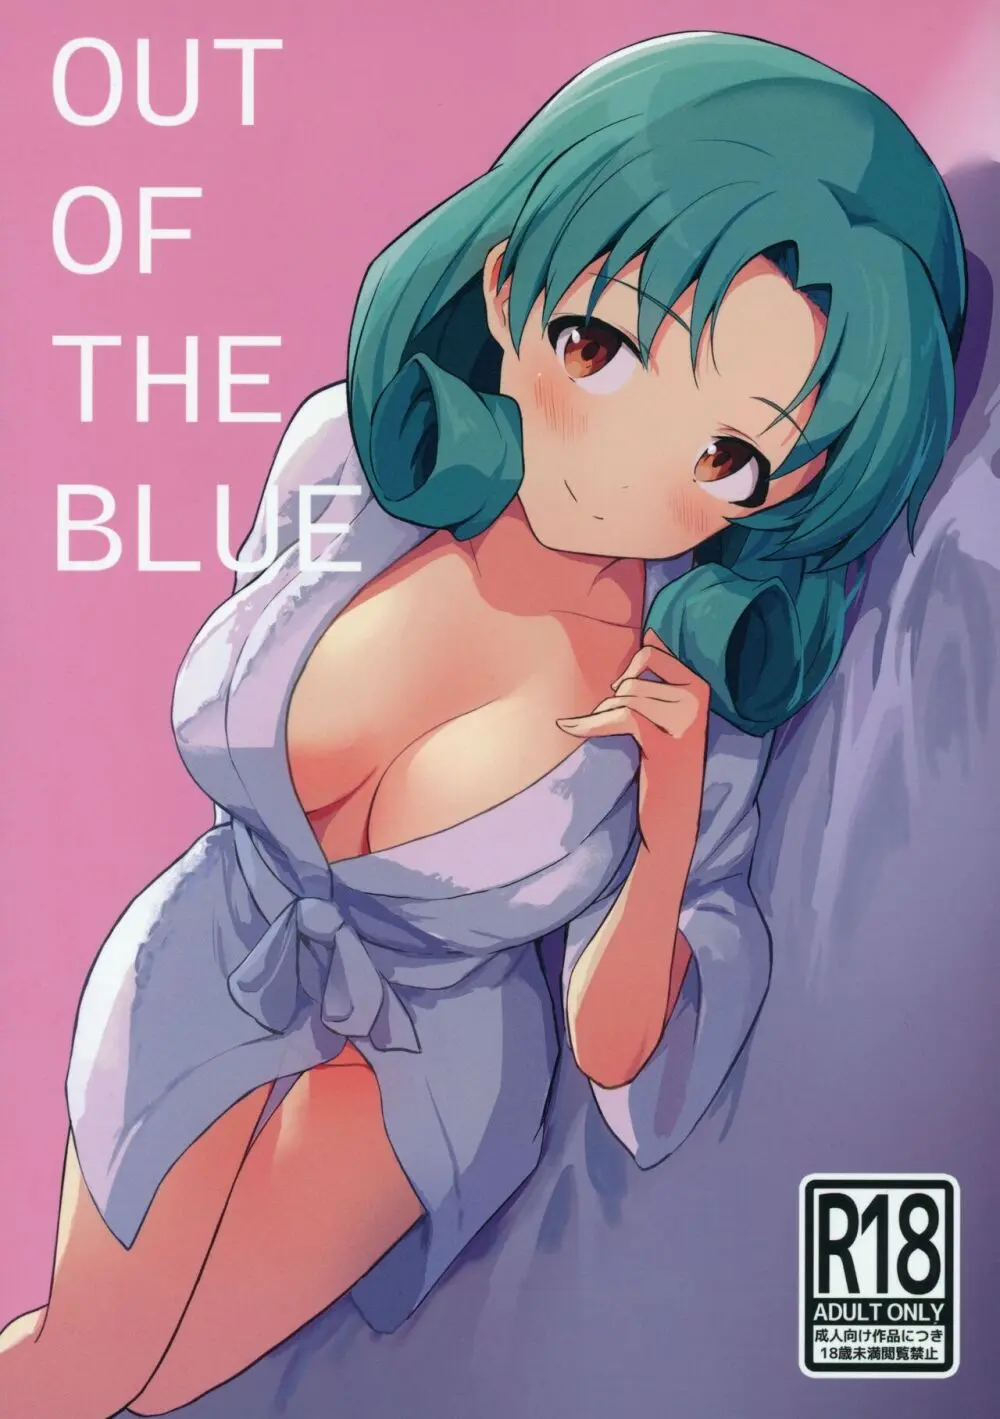 OUT OF THE BLUE 1ページ